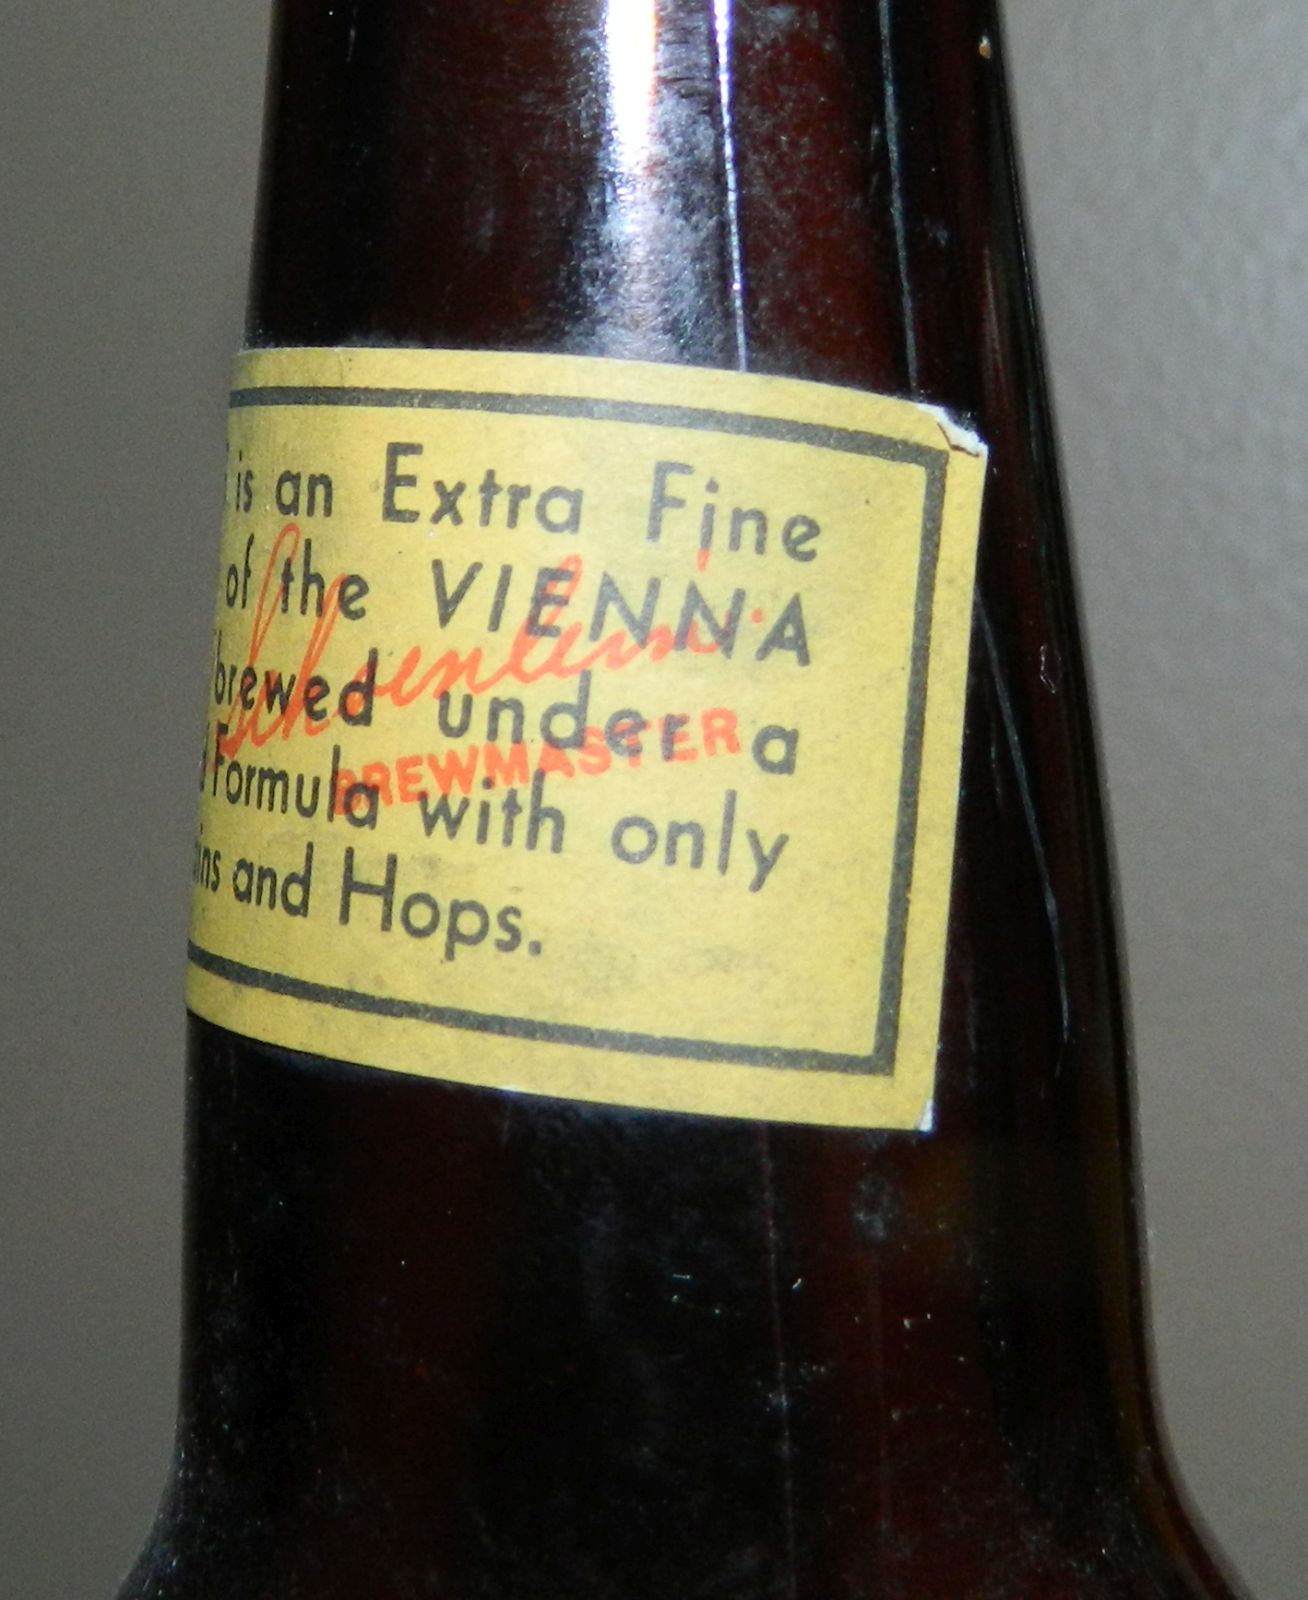 Old Vienna Style Draft Beer Unused 4 1/2x6 Label Chicago IL